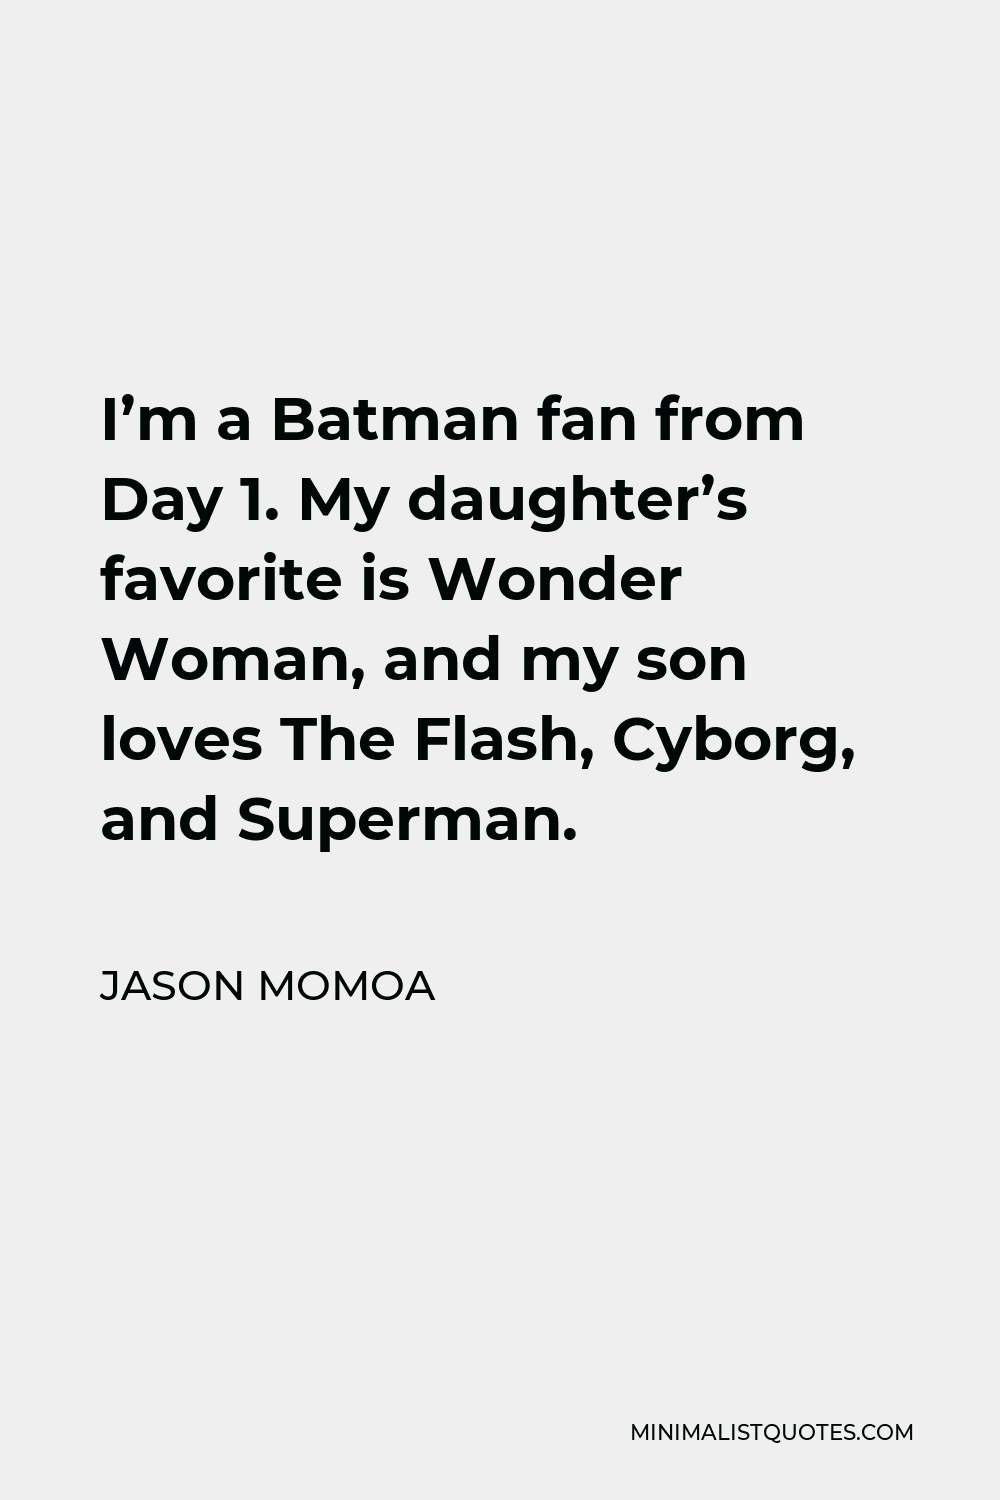 Jason Momoa Quote - I’m a Batman fan from Day 1. My daughter’s favorite is Wonder Woman, and my son loves The Flash, Cyborg, and Superman.